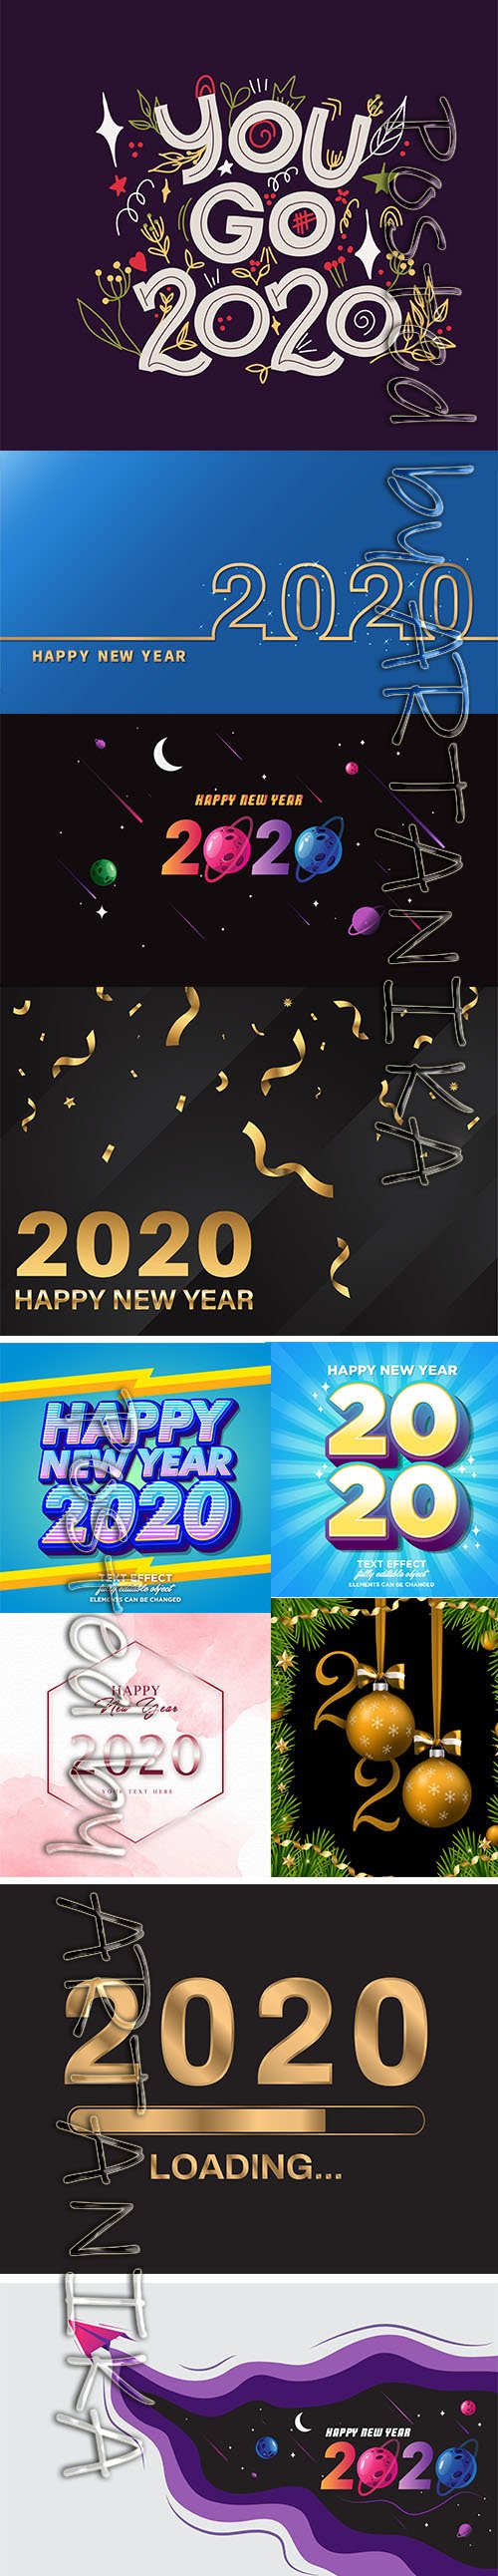 Merry Christmas and New Year 2020 Vector Illustrations Pack Vol 11